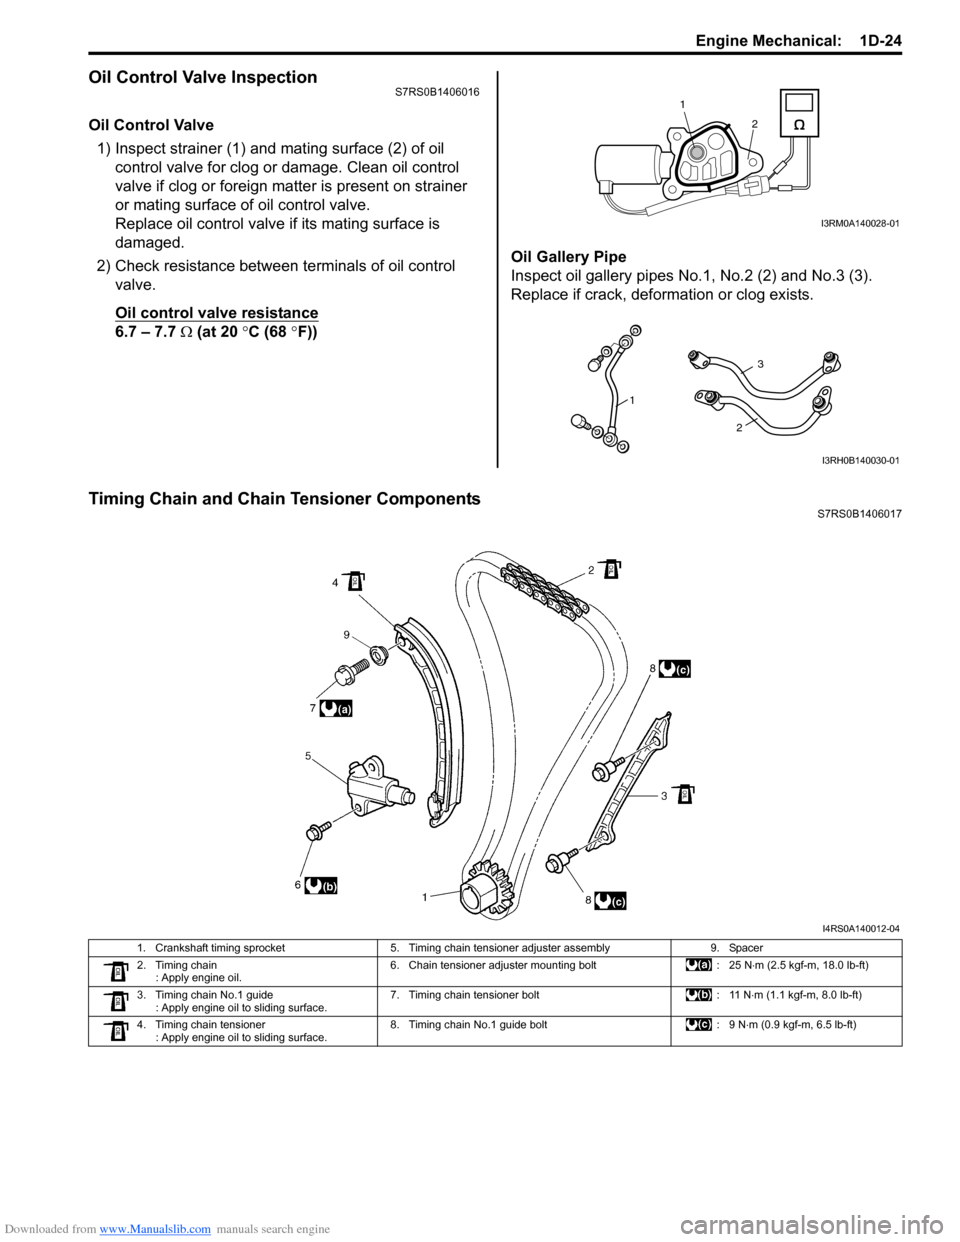 SUZUKI SWIFT 2007 2.G Service Workshop Manual Downloaded from www.Manualslib.com manuals search engine Engine Mechanical:  1D-24
Oil Control Valve InspectionS7RS0B1406016
Oil Control Valve1) Inspect strainer (1) and mating surface (2) of oil  con